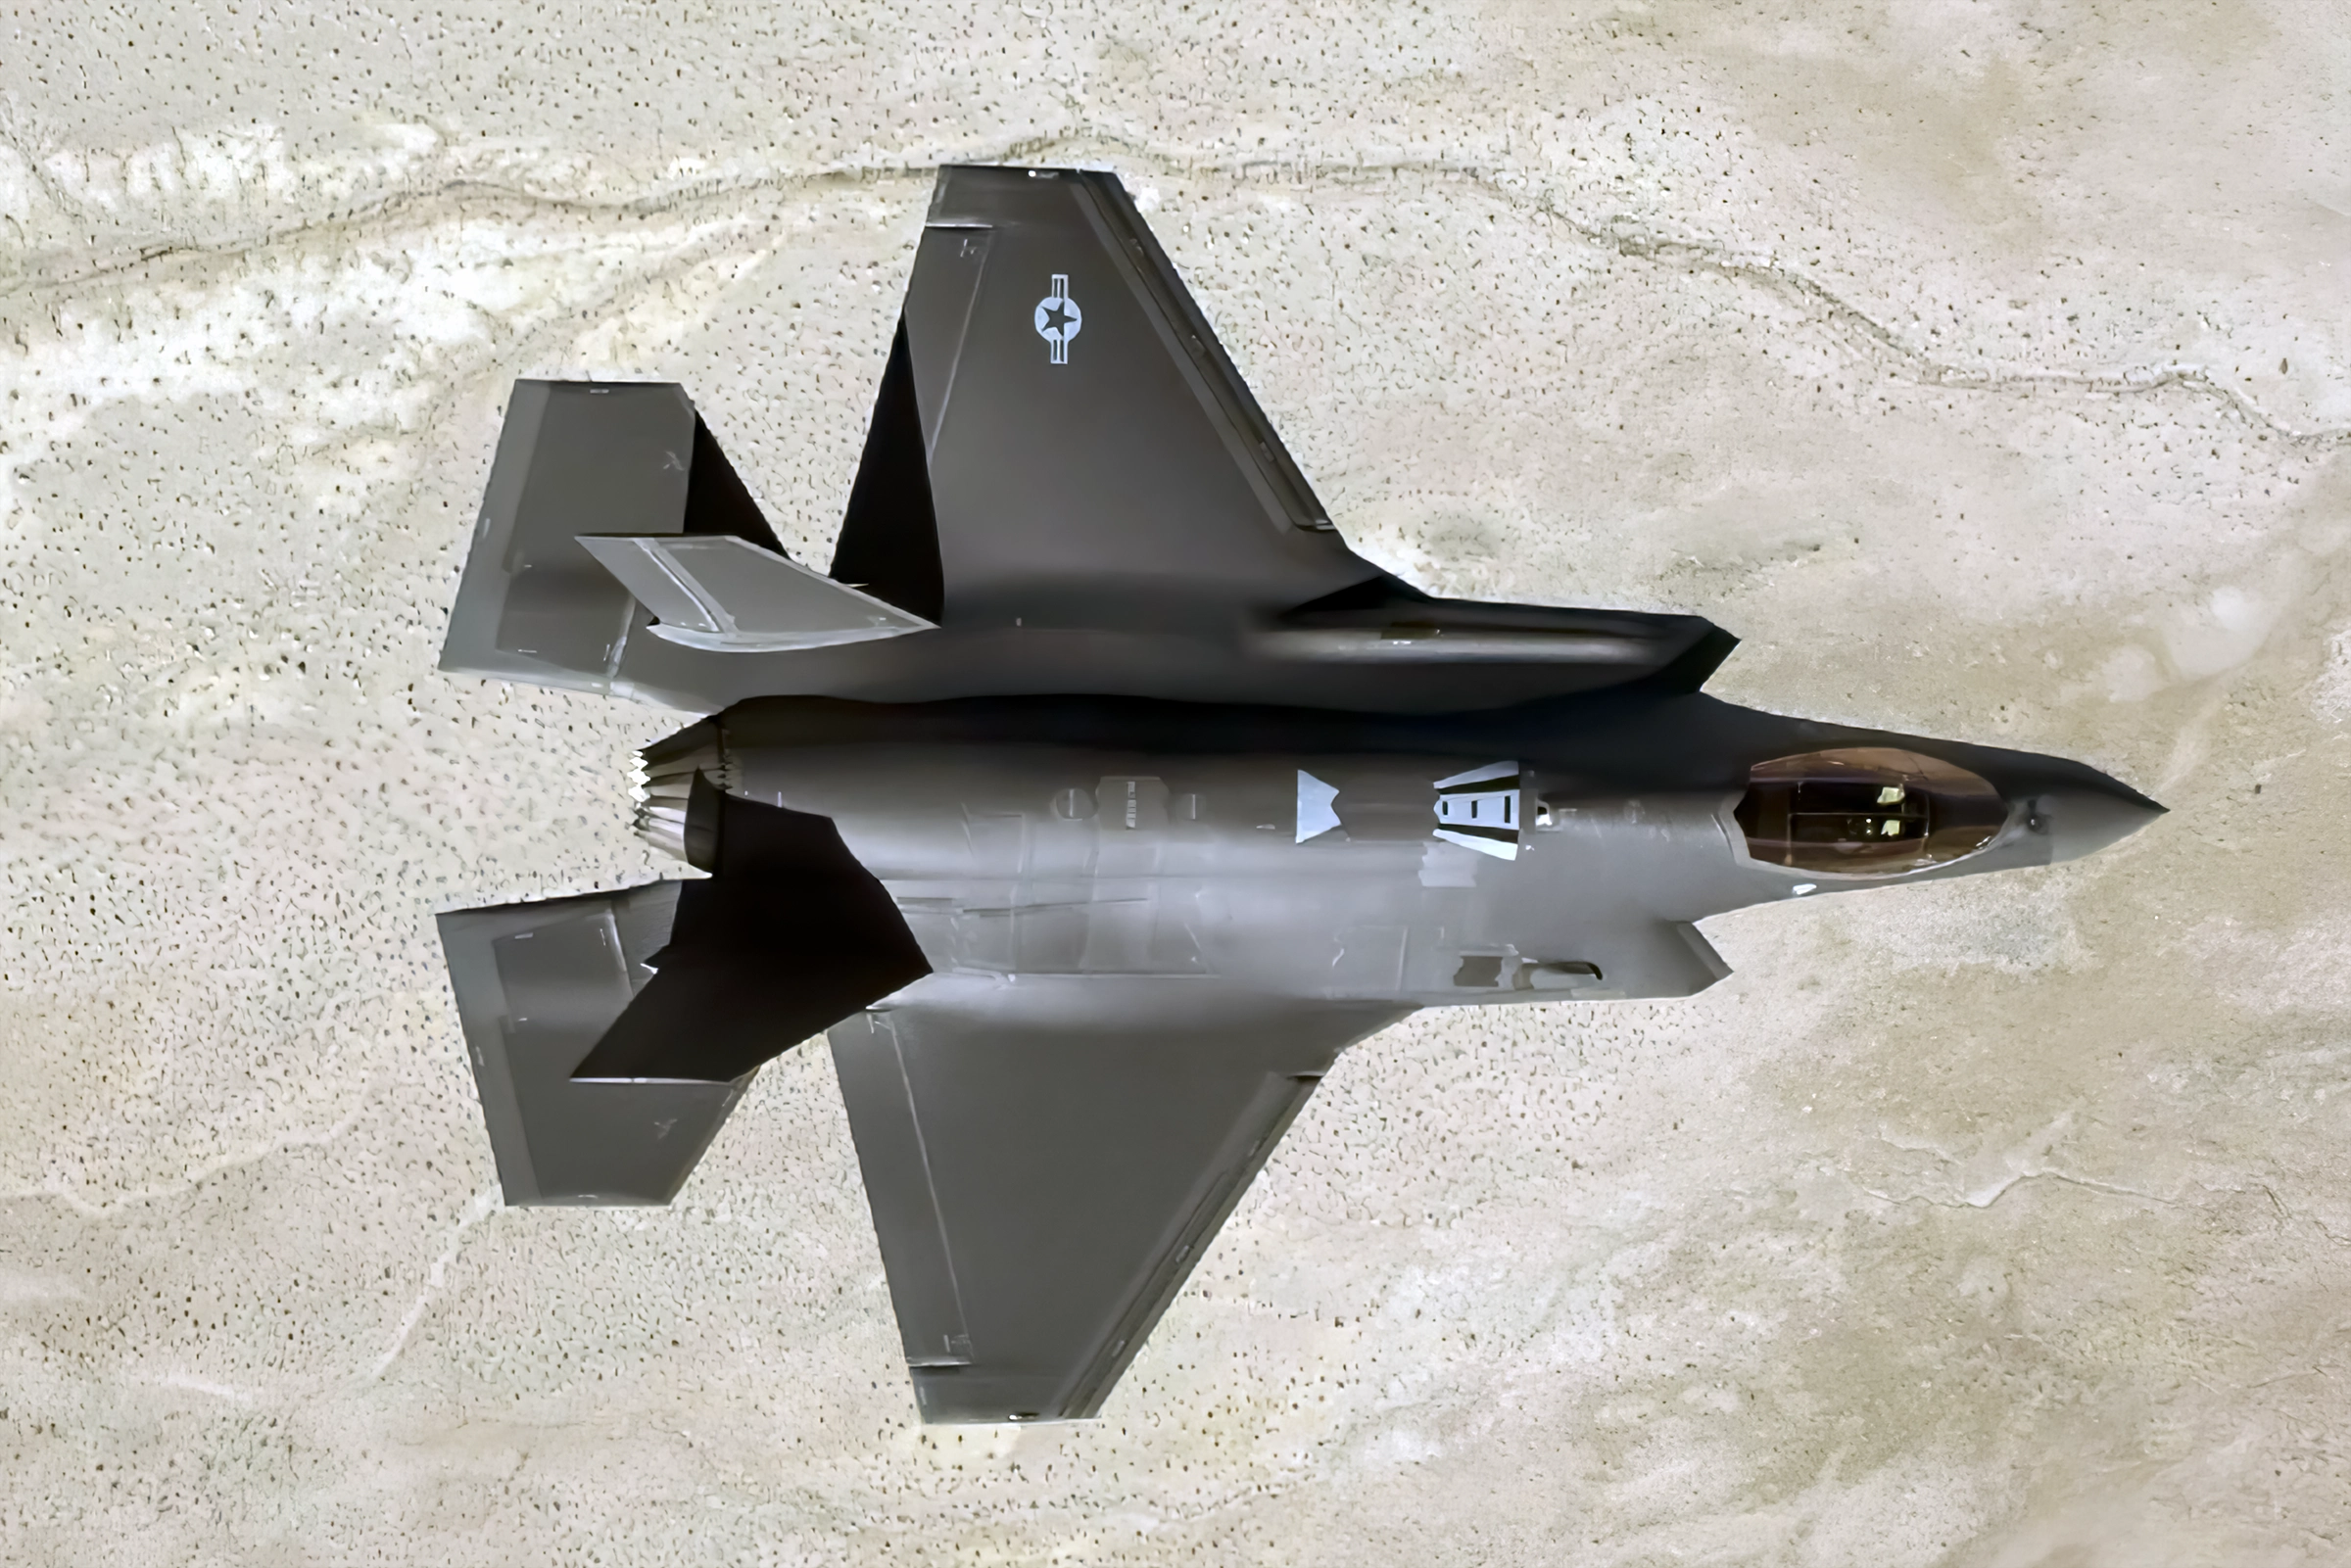 F-35: Axis of the economic and national security of the United States